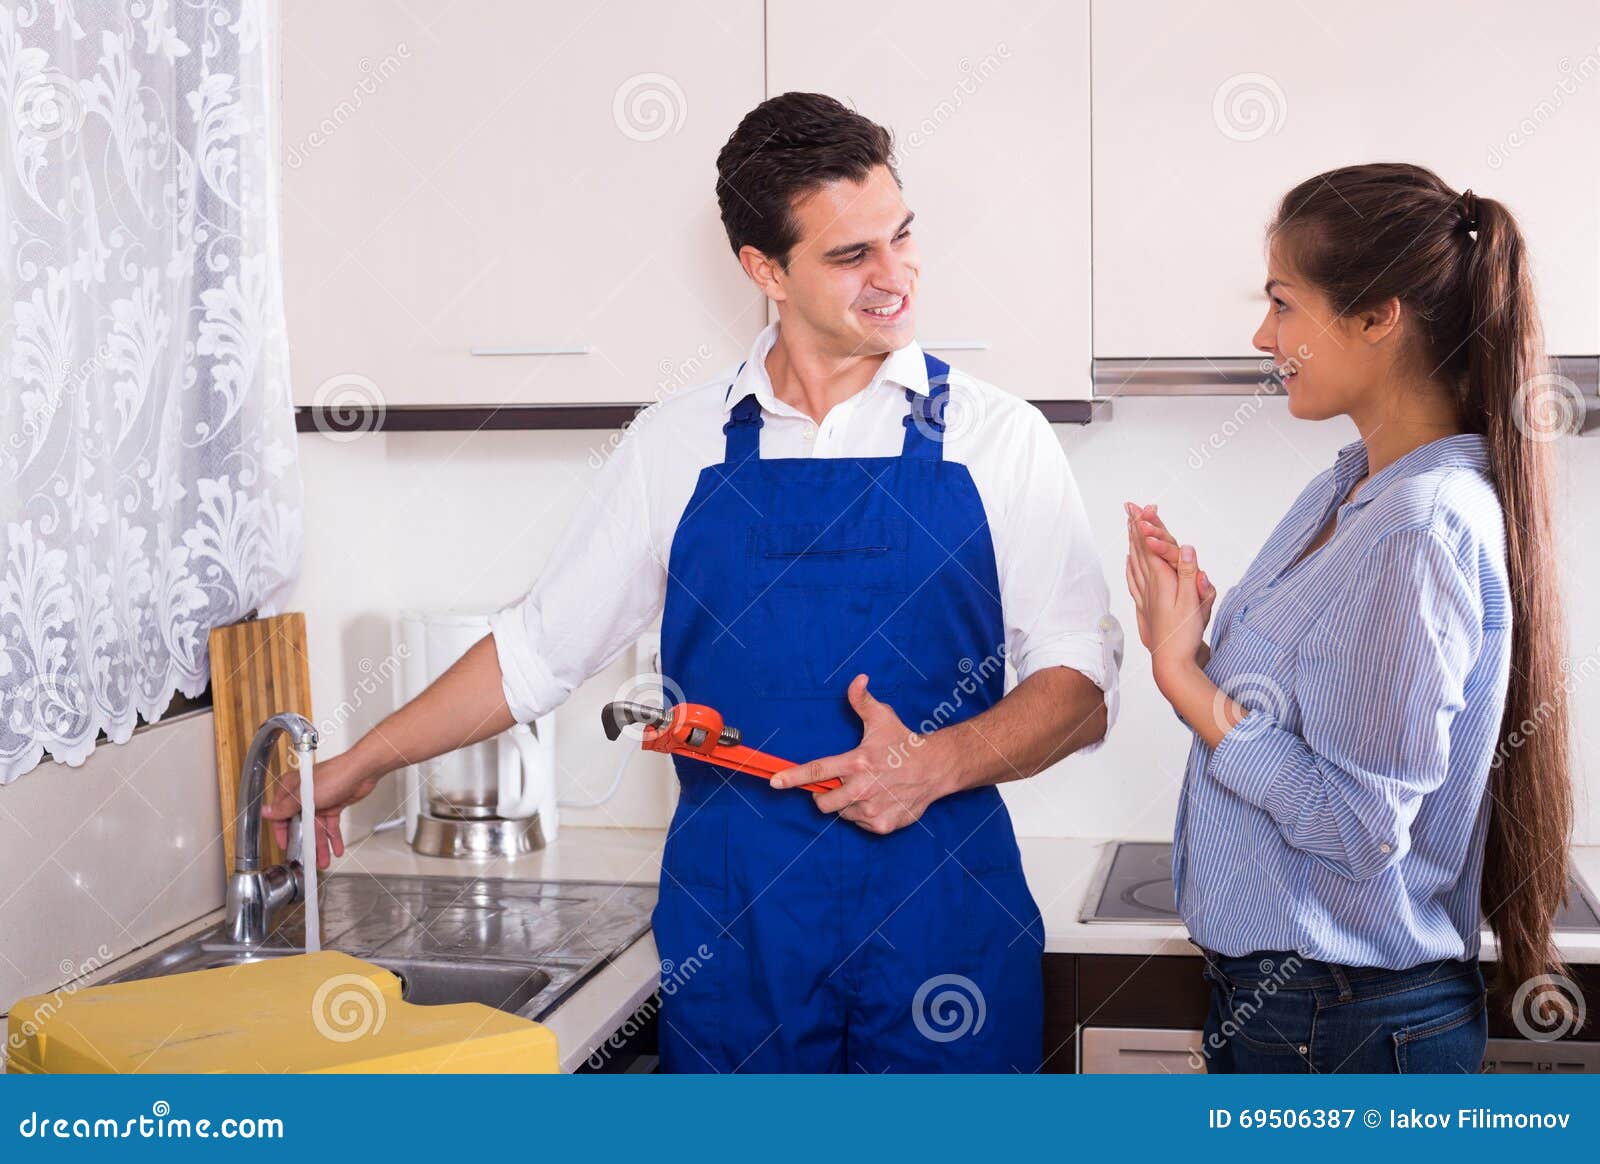 Housewife Called Professional Plumber with Tools To Change Bib picture